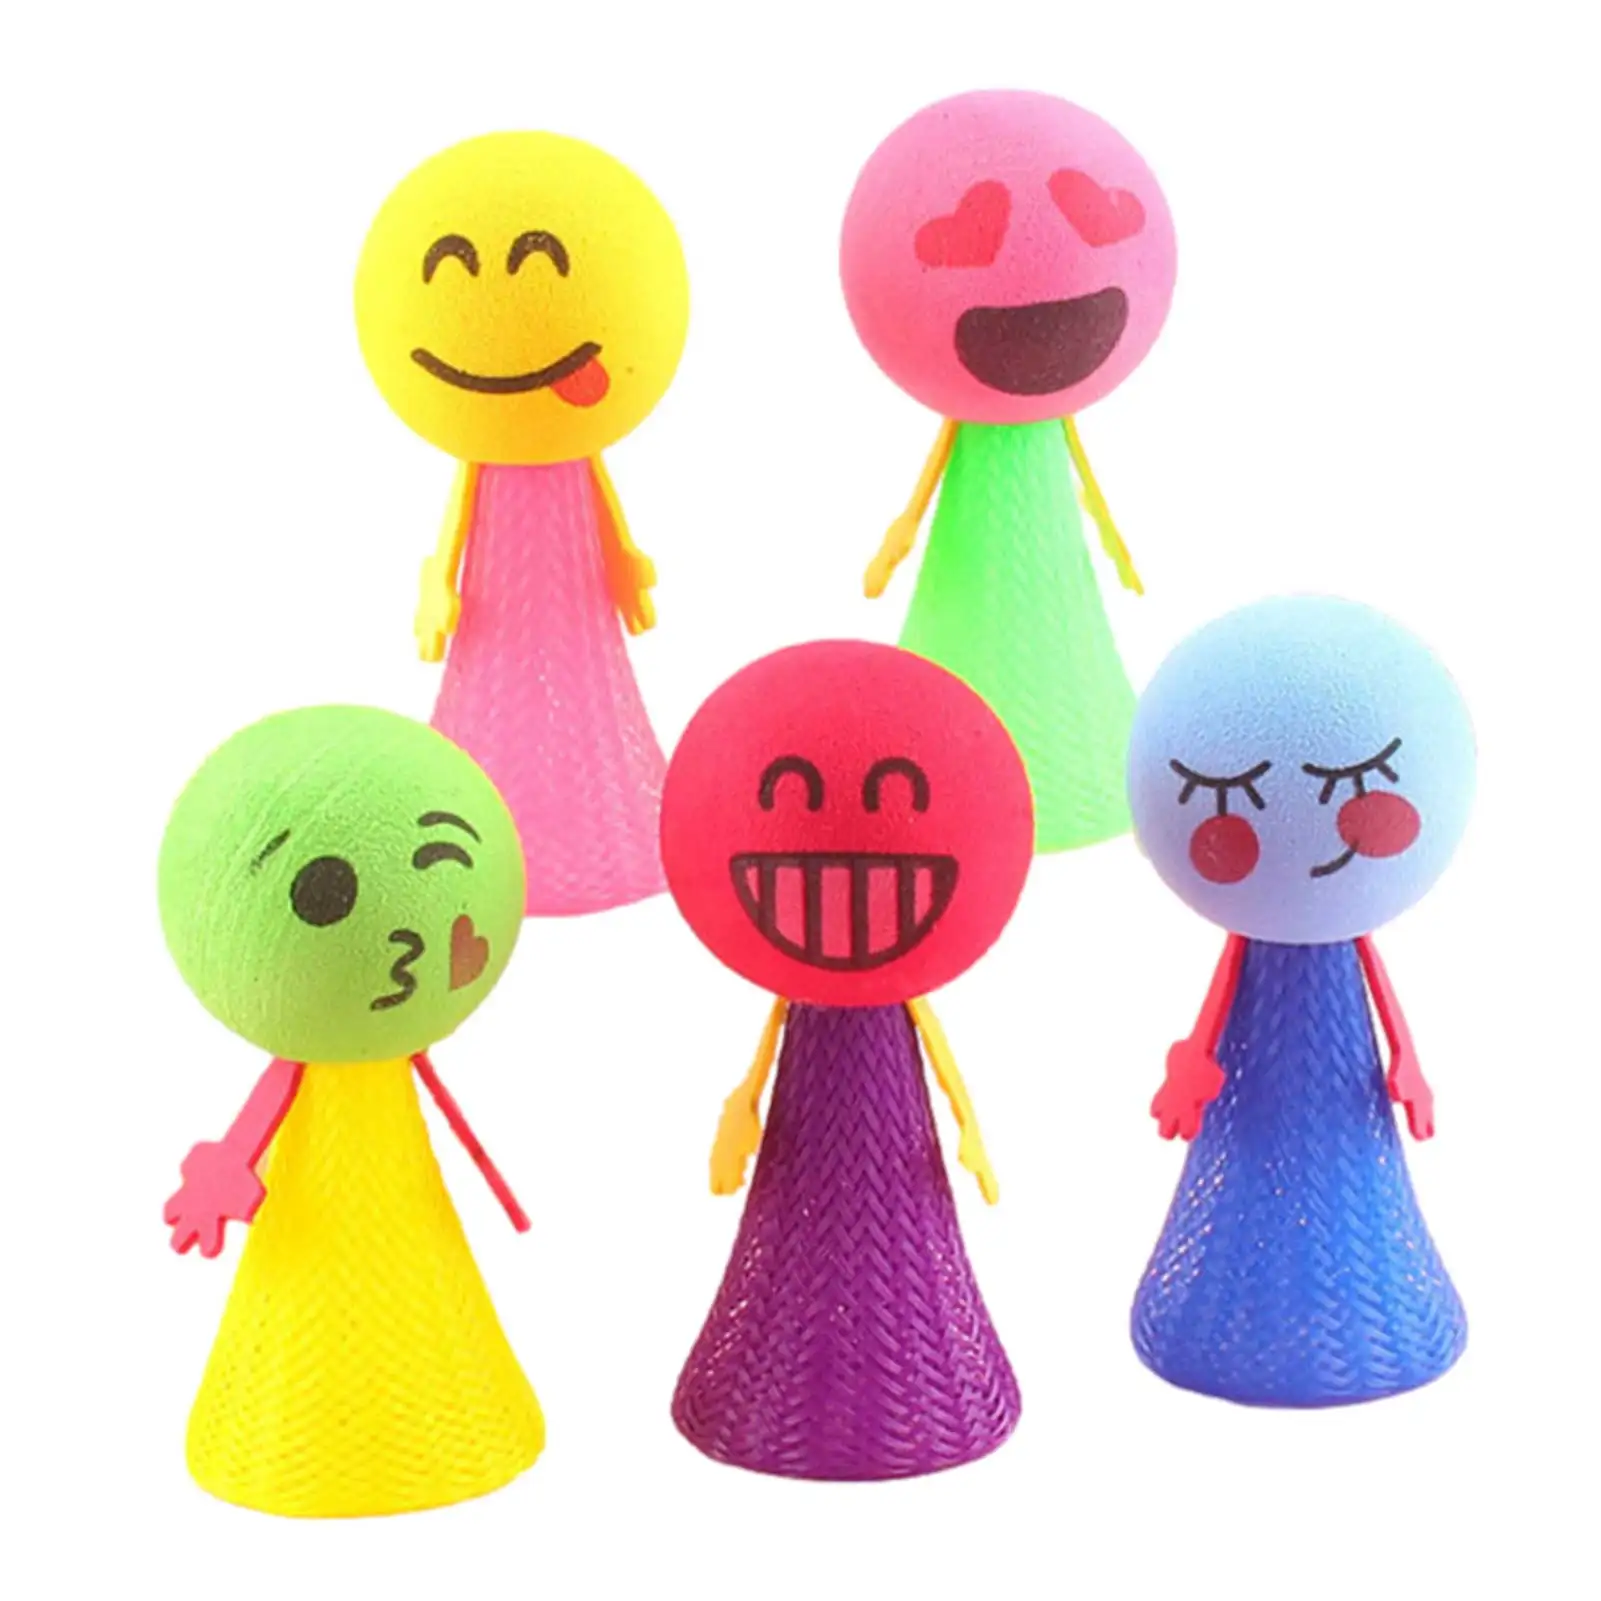 

Funny Jumping Elf Toy Cartoon Decompression Doll Bouncing Toy Creative Small Toys Educational Toy For Kids (Random Color)